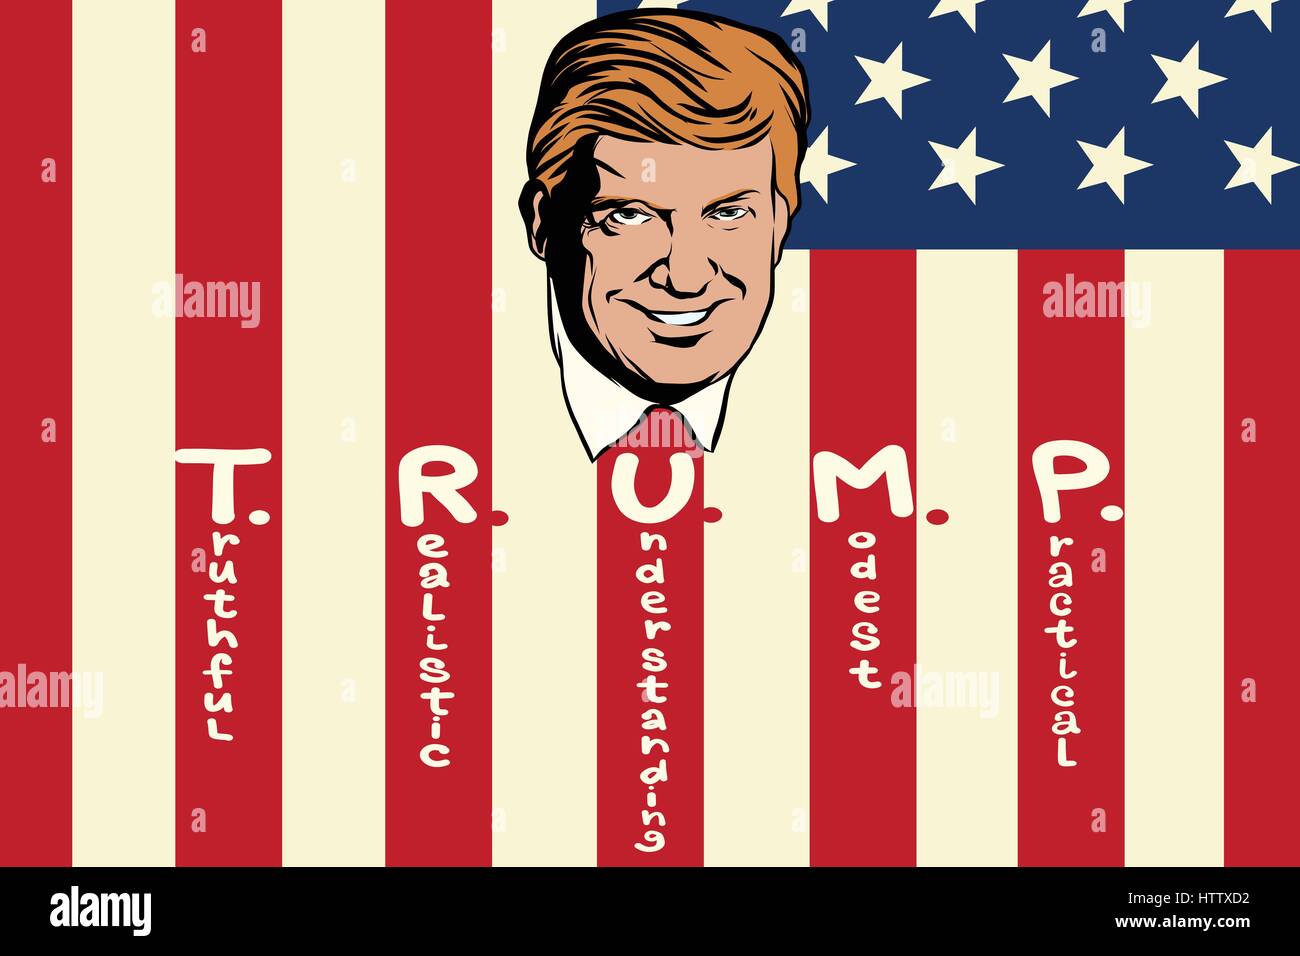 Donald Trump President of the United States. Truthful realistic understanding modest practical. Retro comic book style pop art retro illustration colo Stock Vector